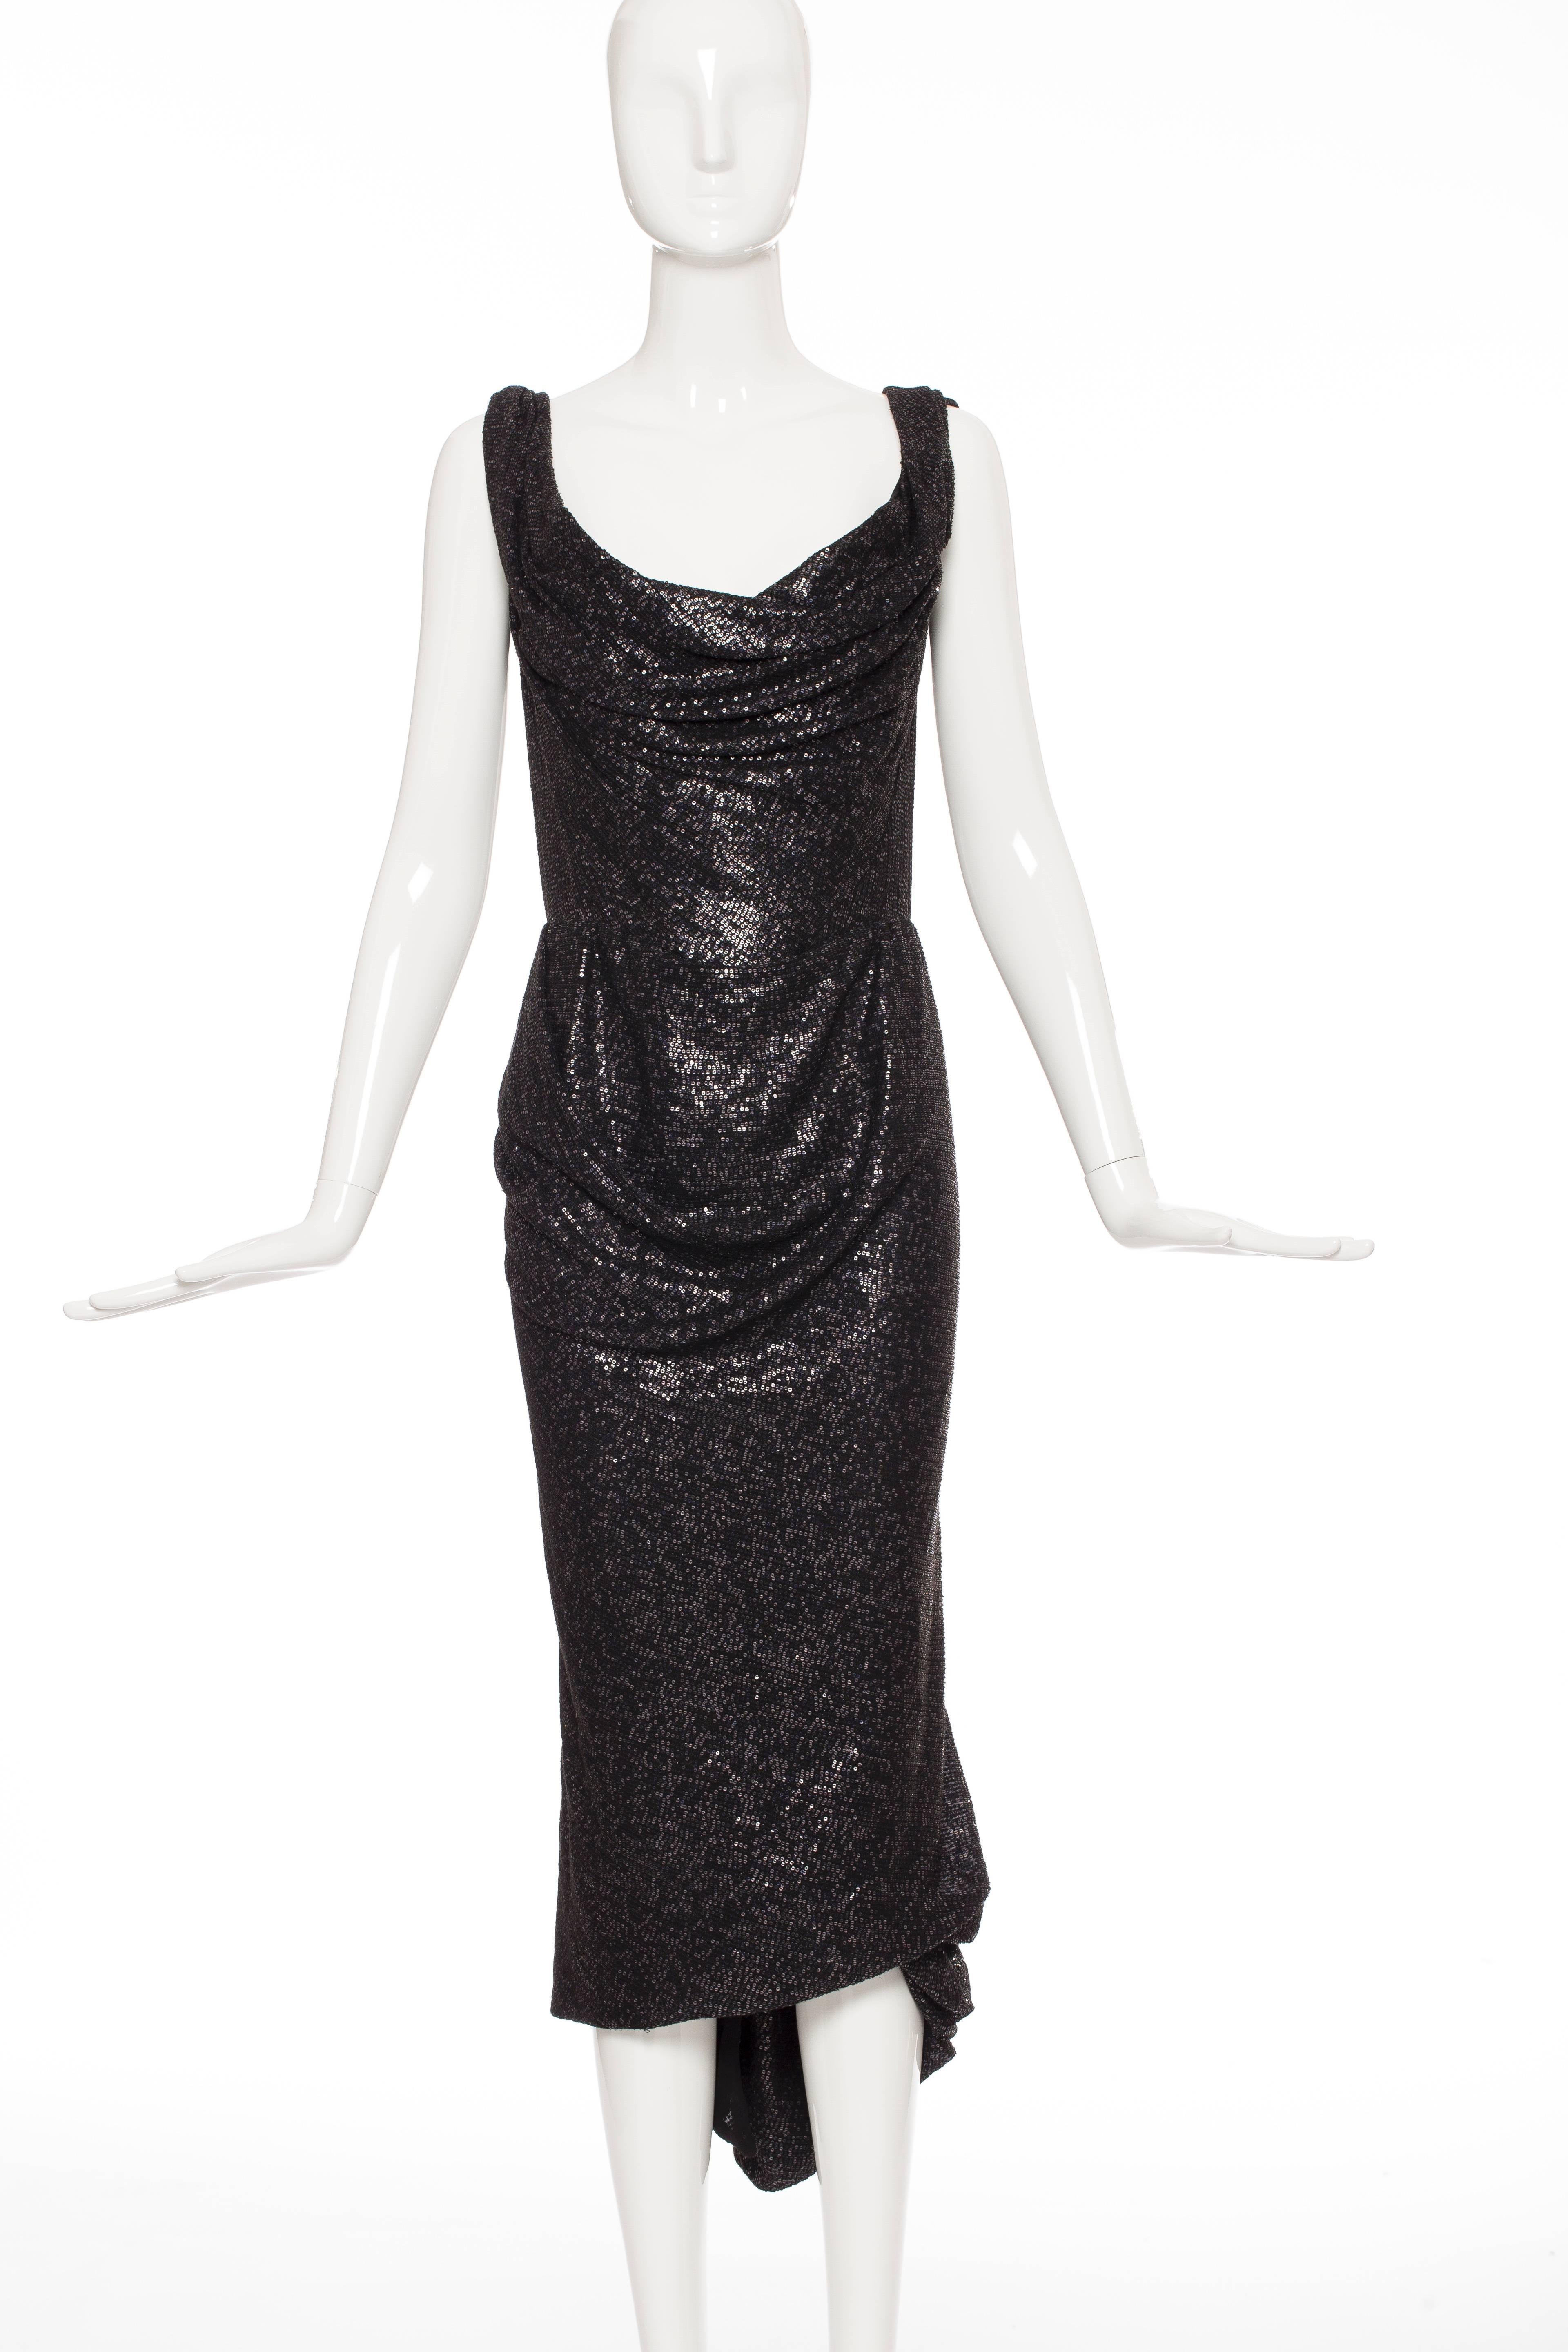 Vivienne Westwood Gold Label, Autumn/Winter 2011, black off-the-shoulder dress with sequined embellishments throughout, corset at lining, draping throughout, fishtail hem at back and back zip closure.

No size label.

Bust 36”, Waist 28”, Hip